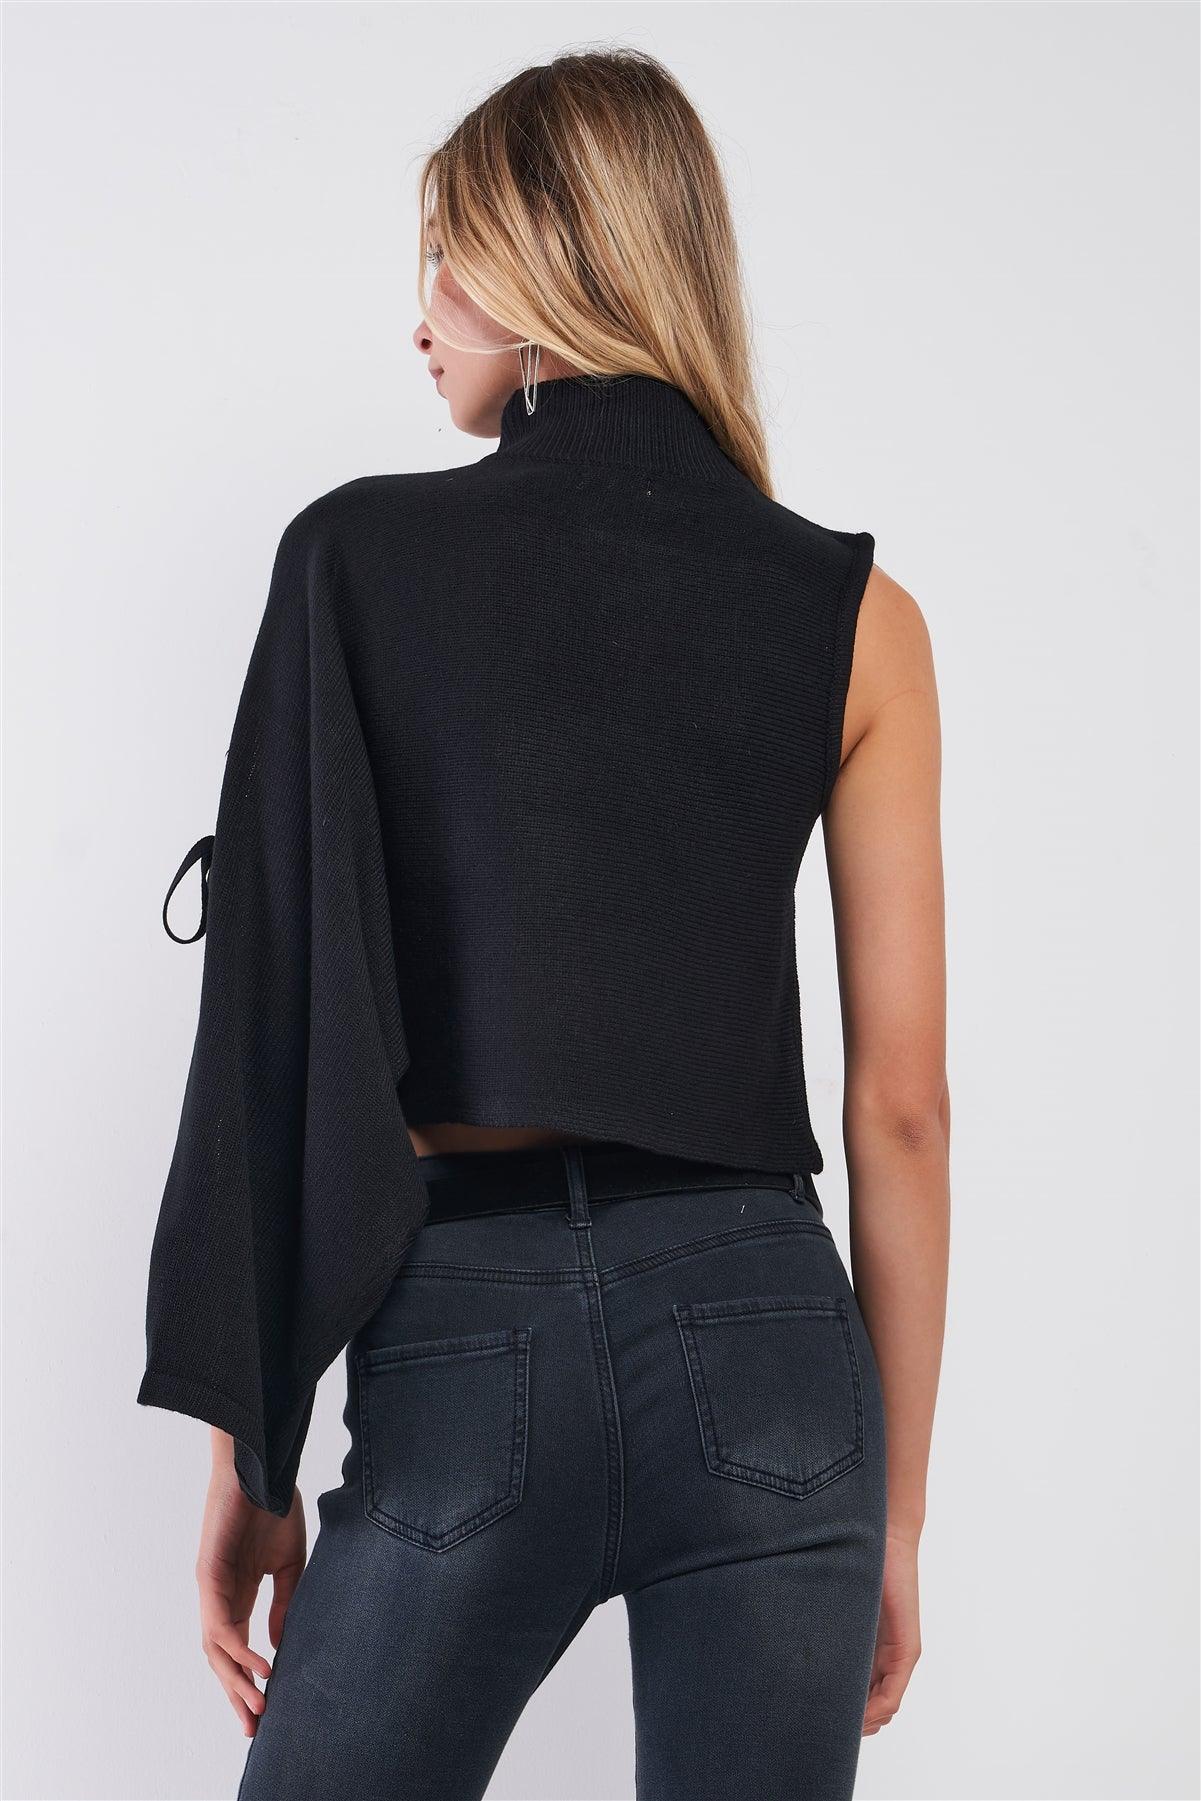 Black One-Shoulder Turtle Neck Bat Sleeve With Slit Cropped Sweaters /3-2-1